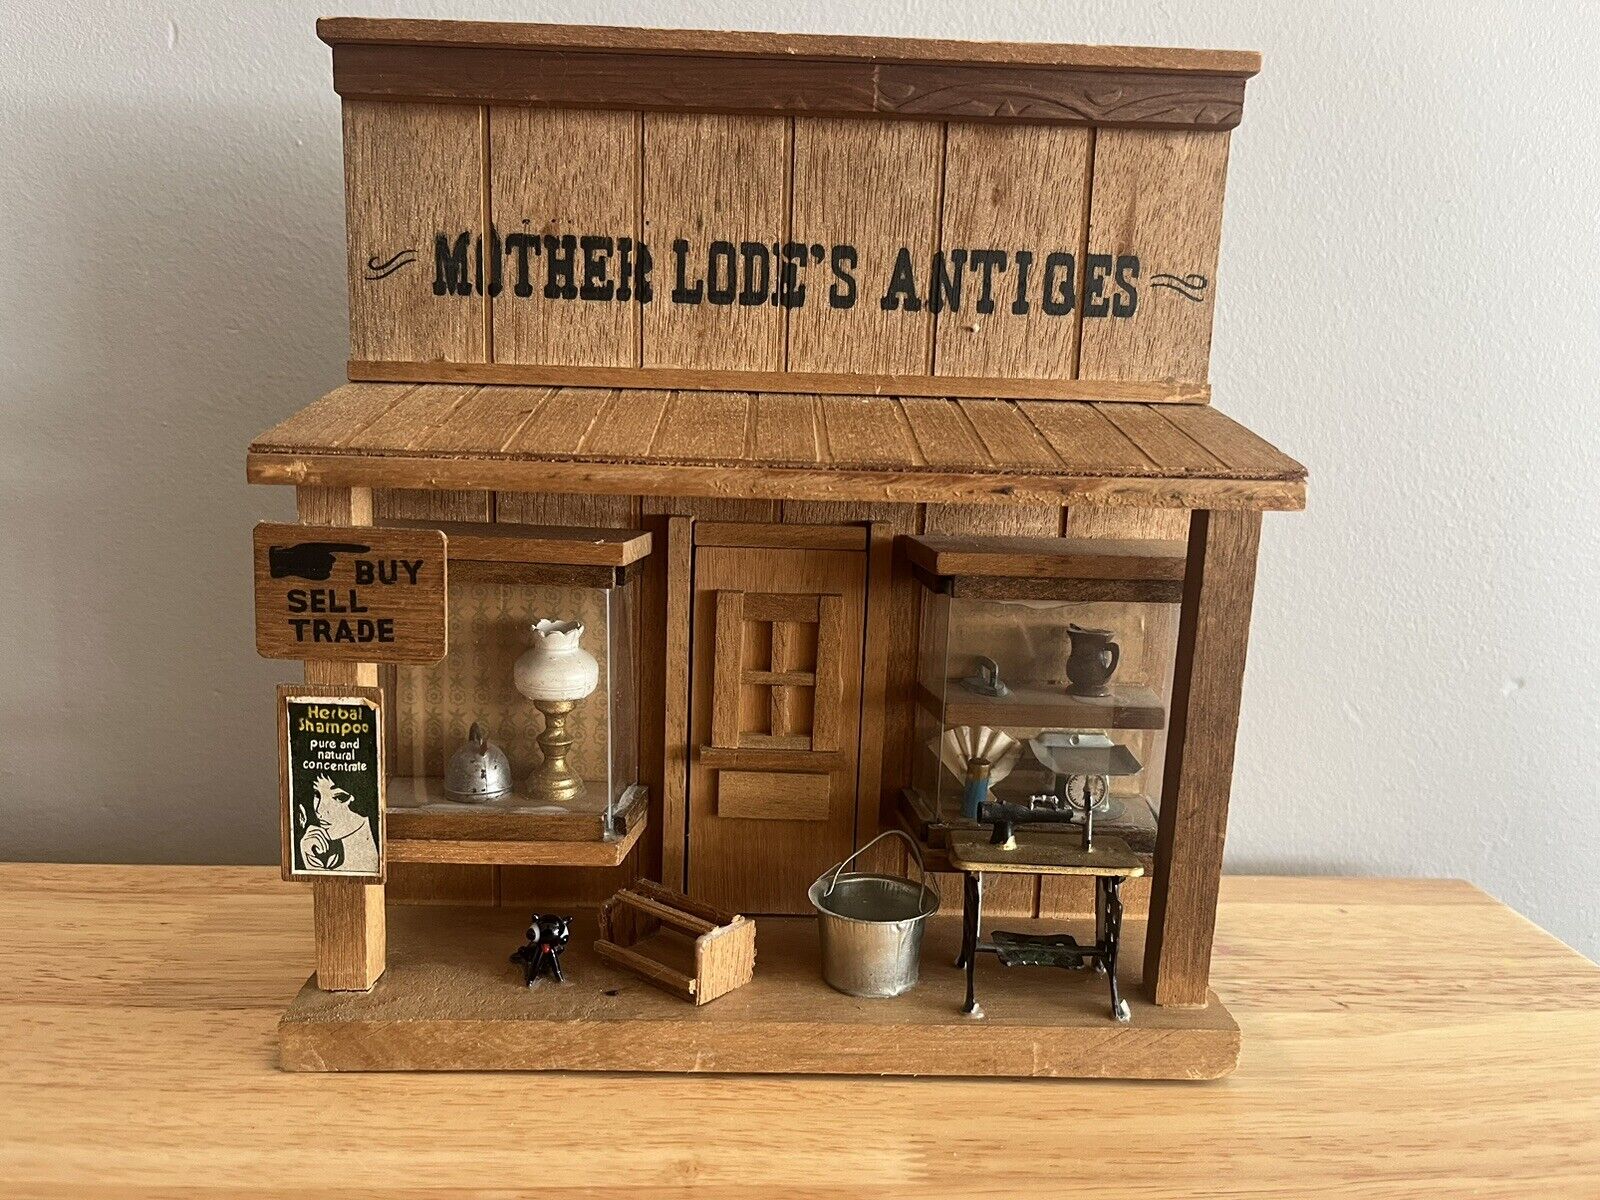 Vintage Mother Lode's Antiques Storefront Wood Diorama Miniature Western Display